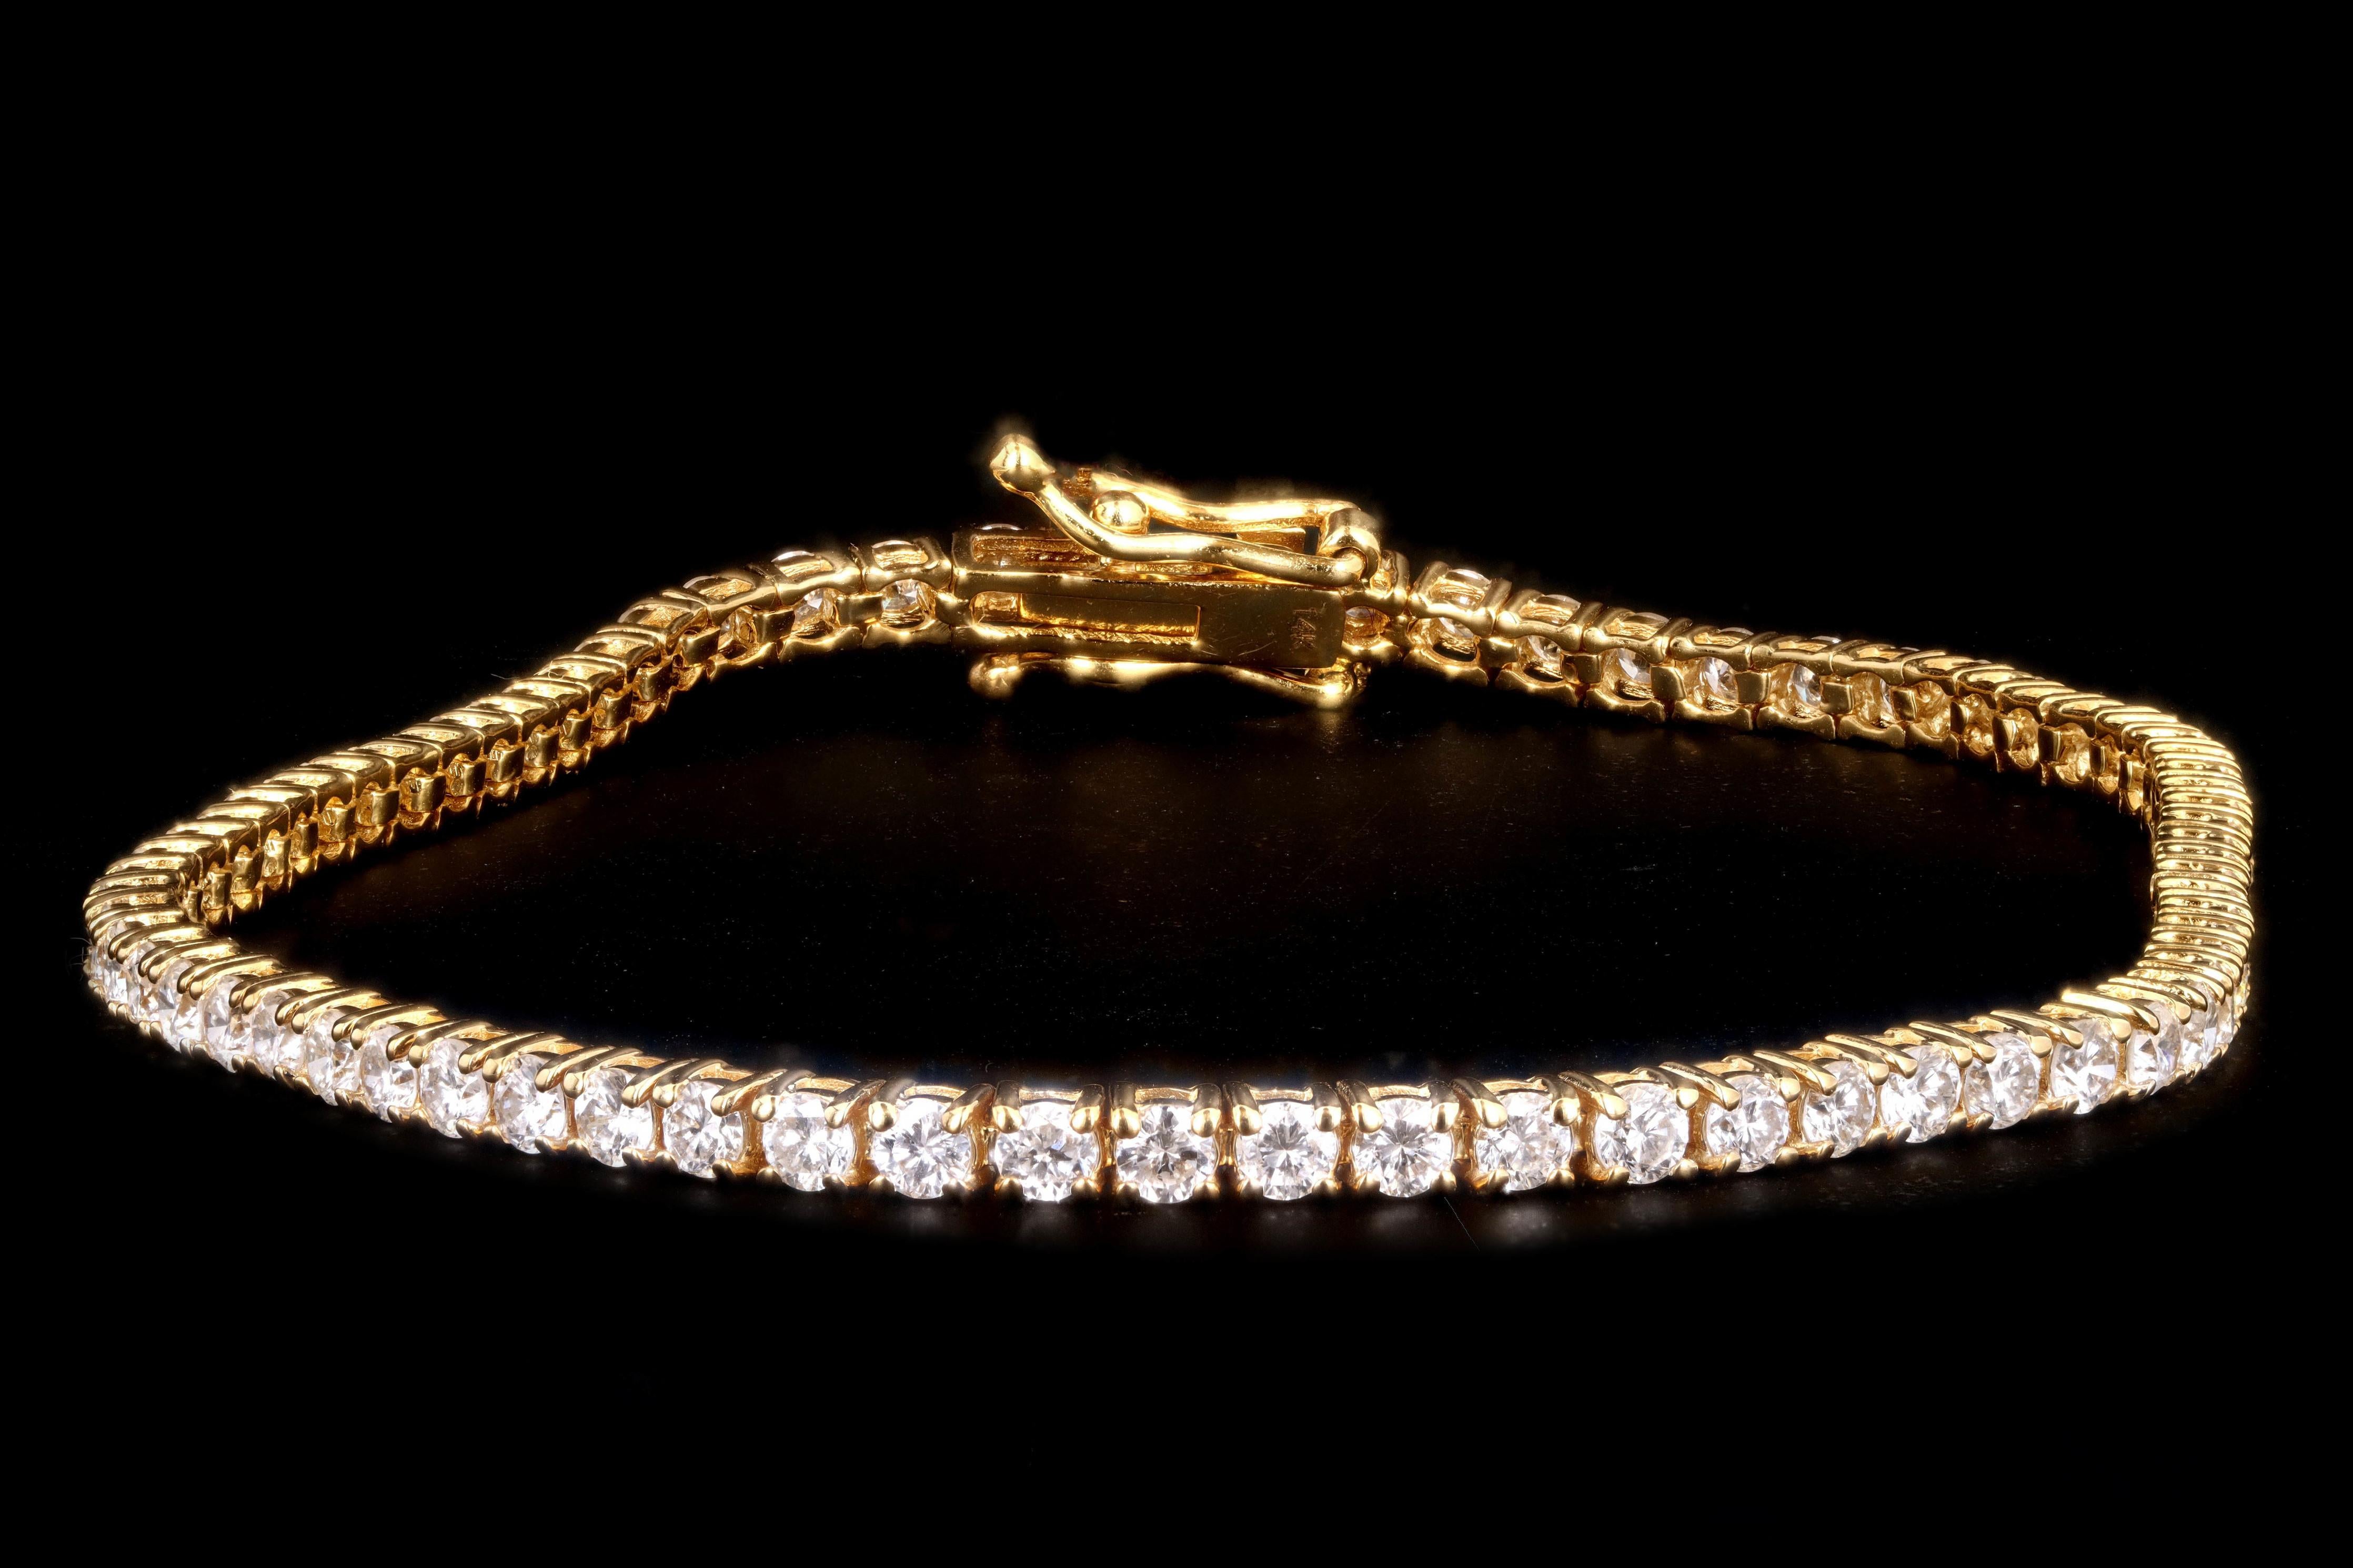 Era: New

Composition: 14K Yellow Gold

Primary Stone: Round Brilliant Cut Diamonds

Total Carat Weight: Approximately 5.93 Carats 

Color/Clarity: G-H / SI1-2

Bracelet Length: 8 Inches

Bracelet Weight: 8.3 Grams 